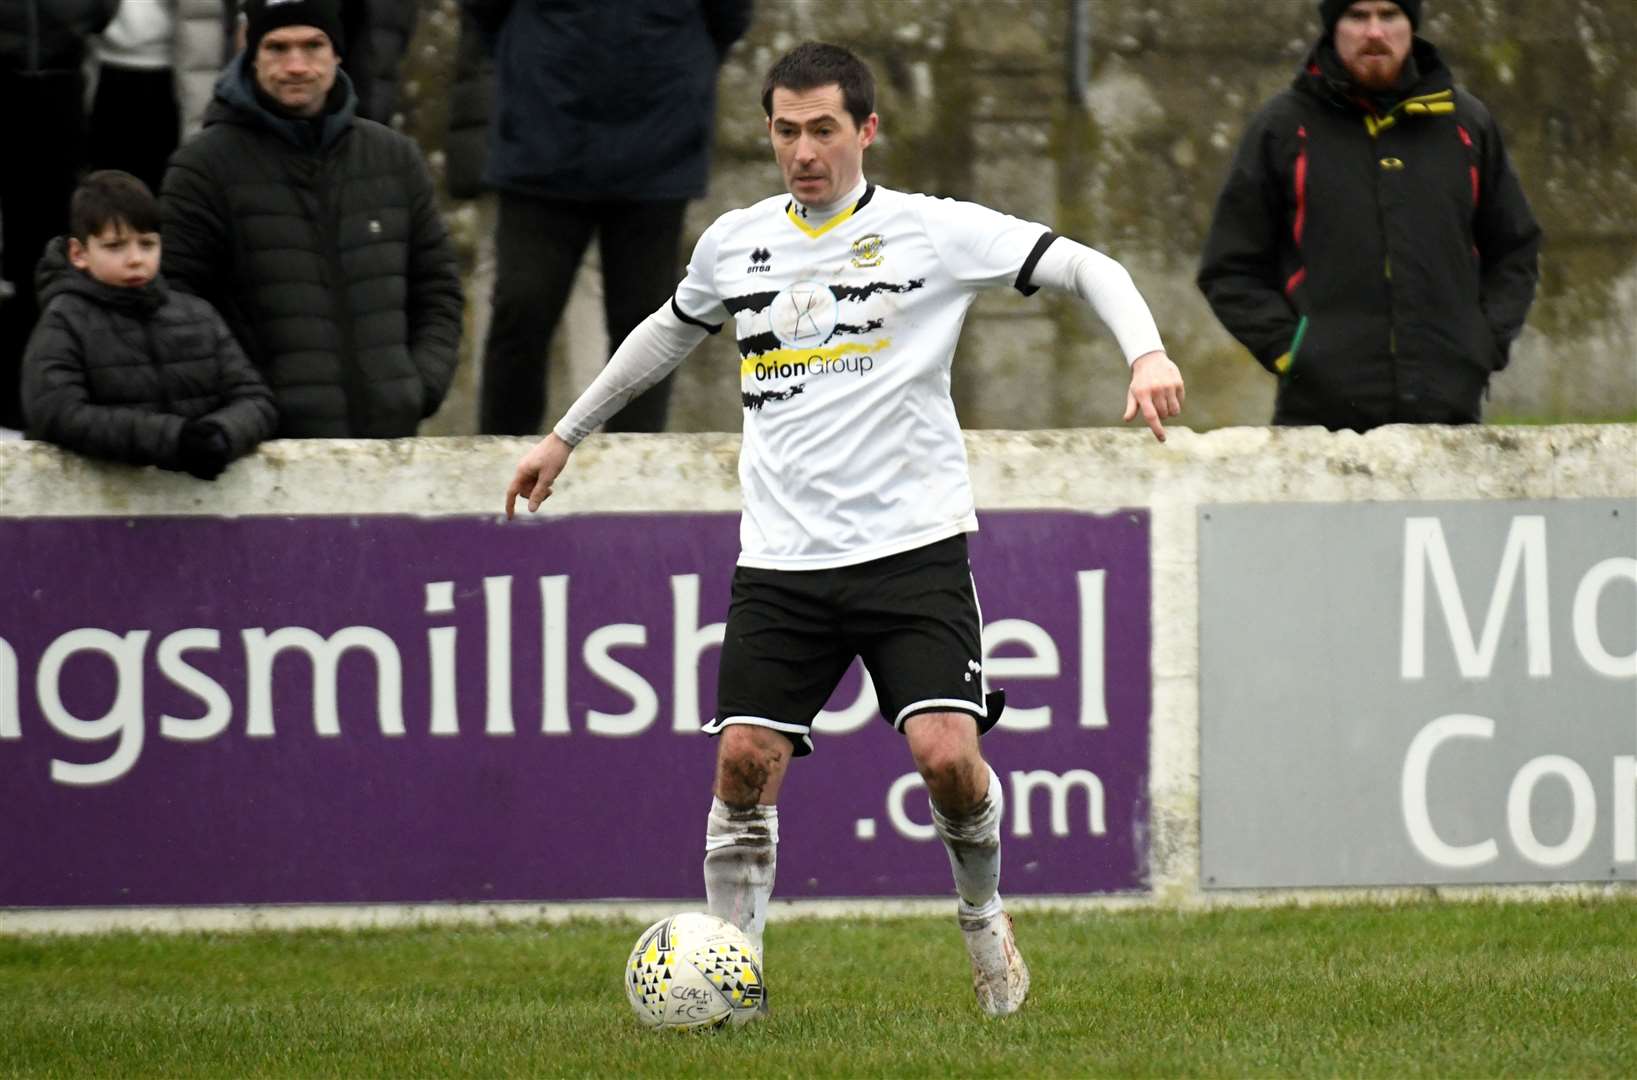 Blair Lawrie will take temporary charge of Clach alongside Martin Callum. Picture: James Mackenzie